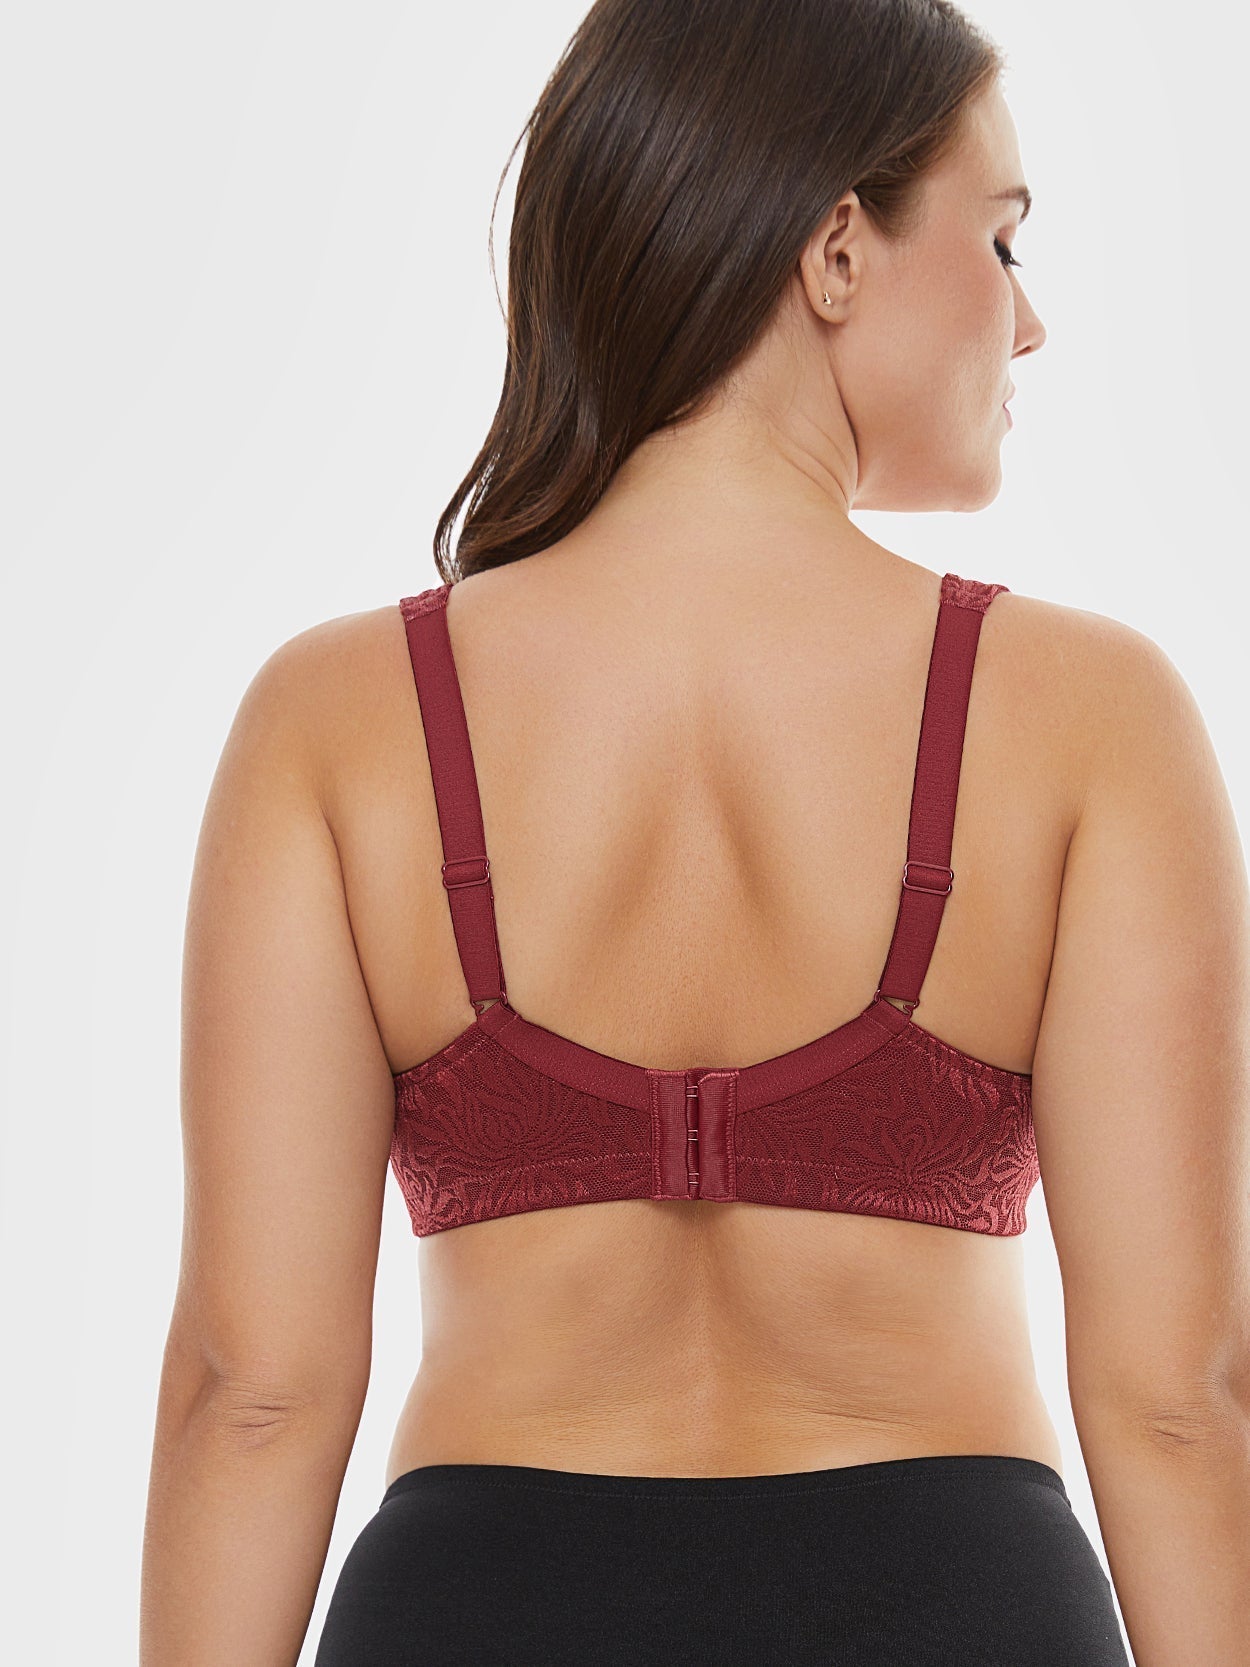 Minimizer Bra Non Padded Wire-free Wine Red – WingsLove